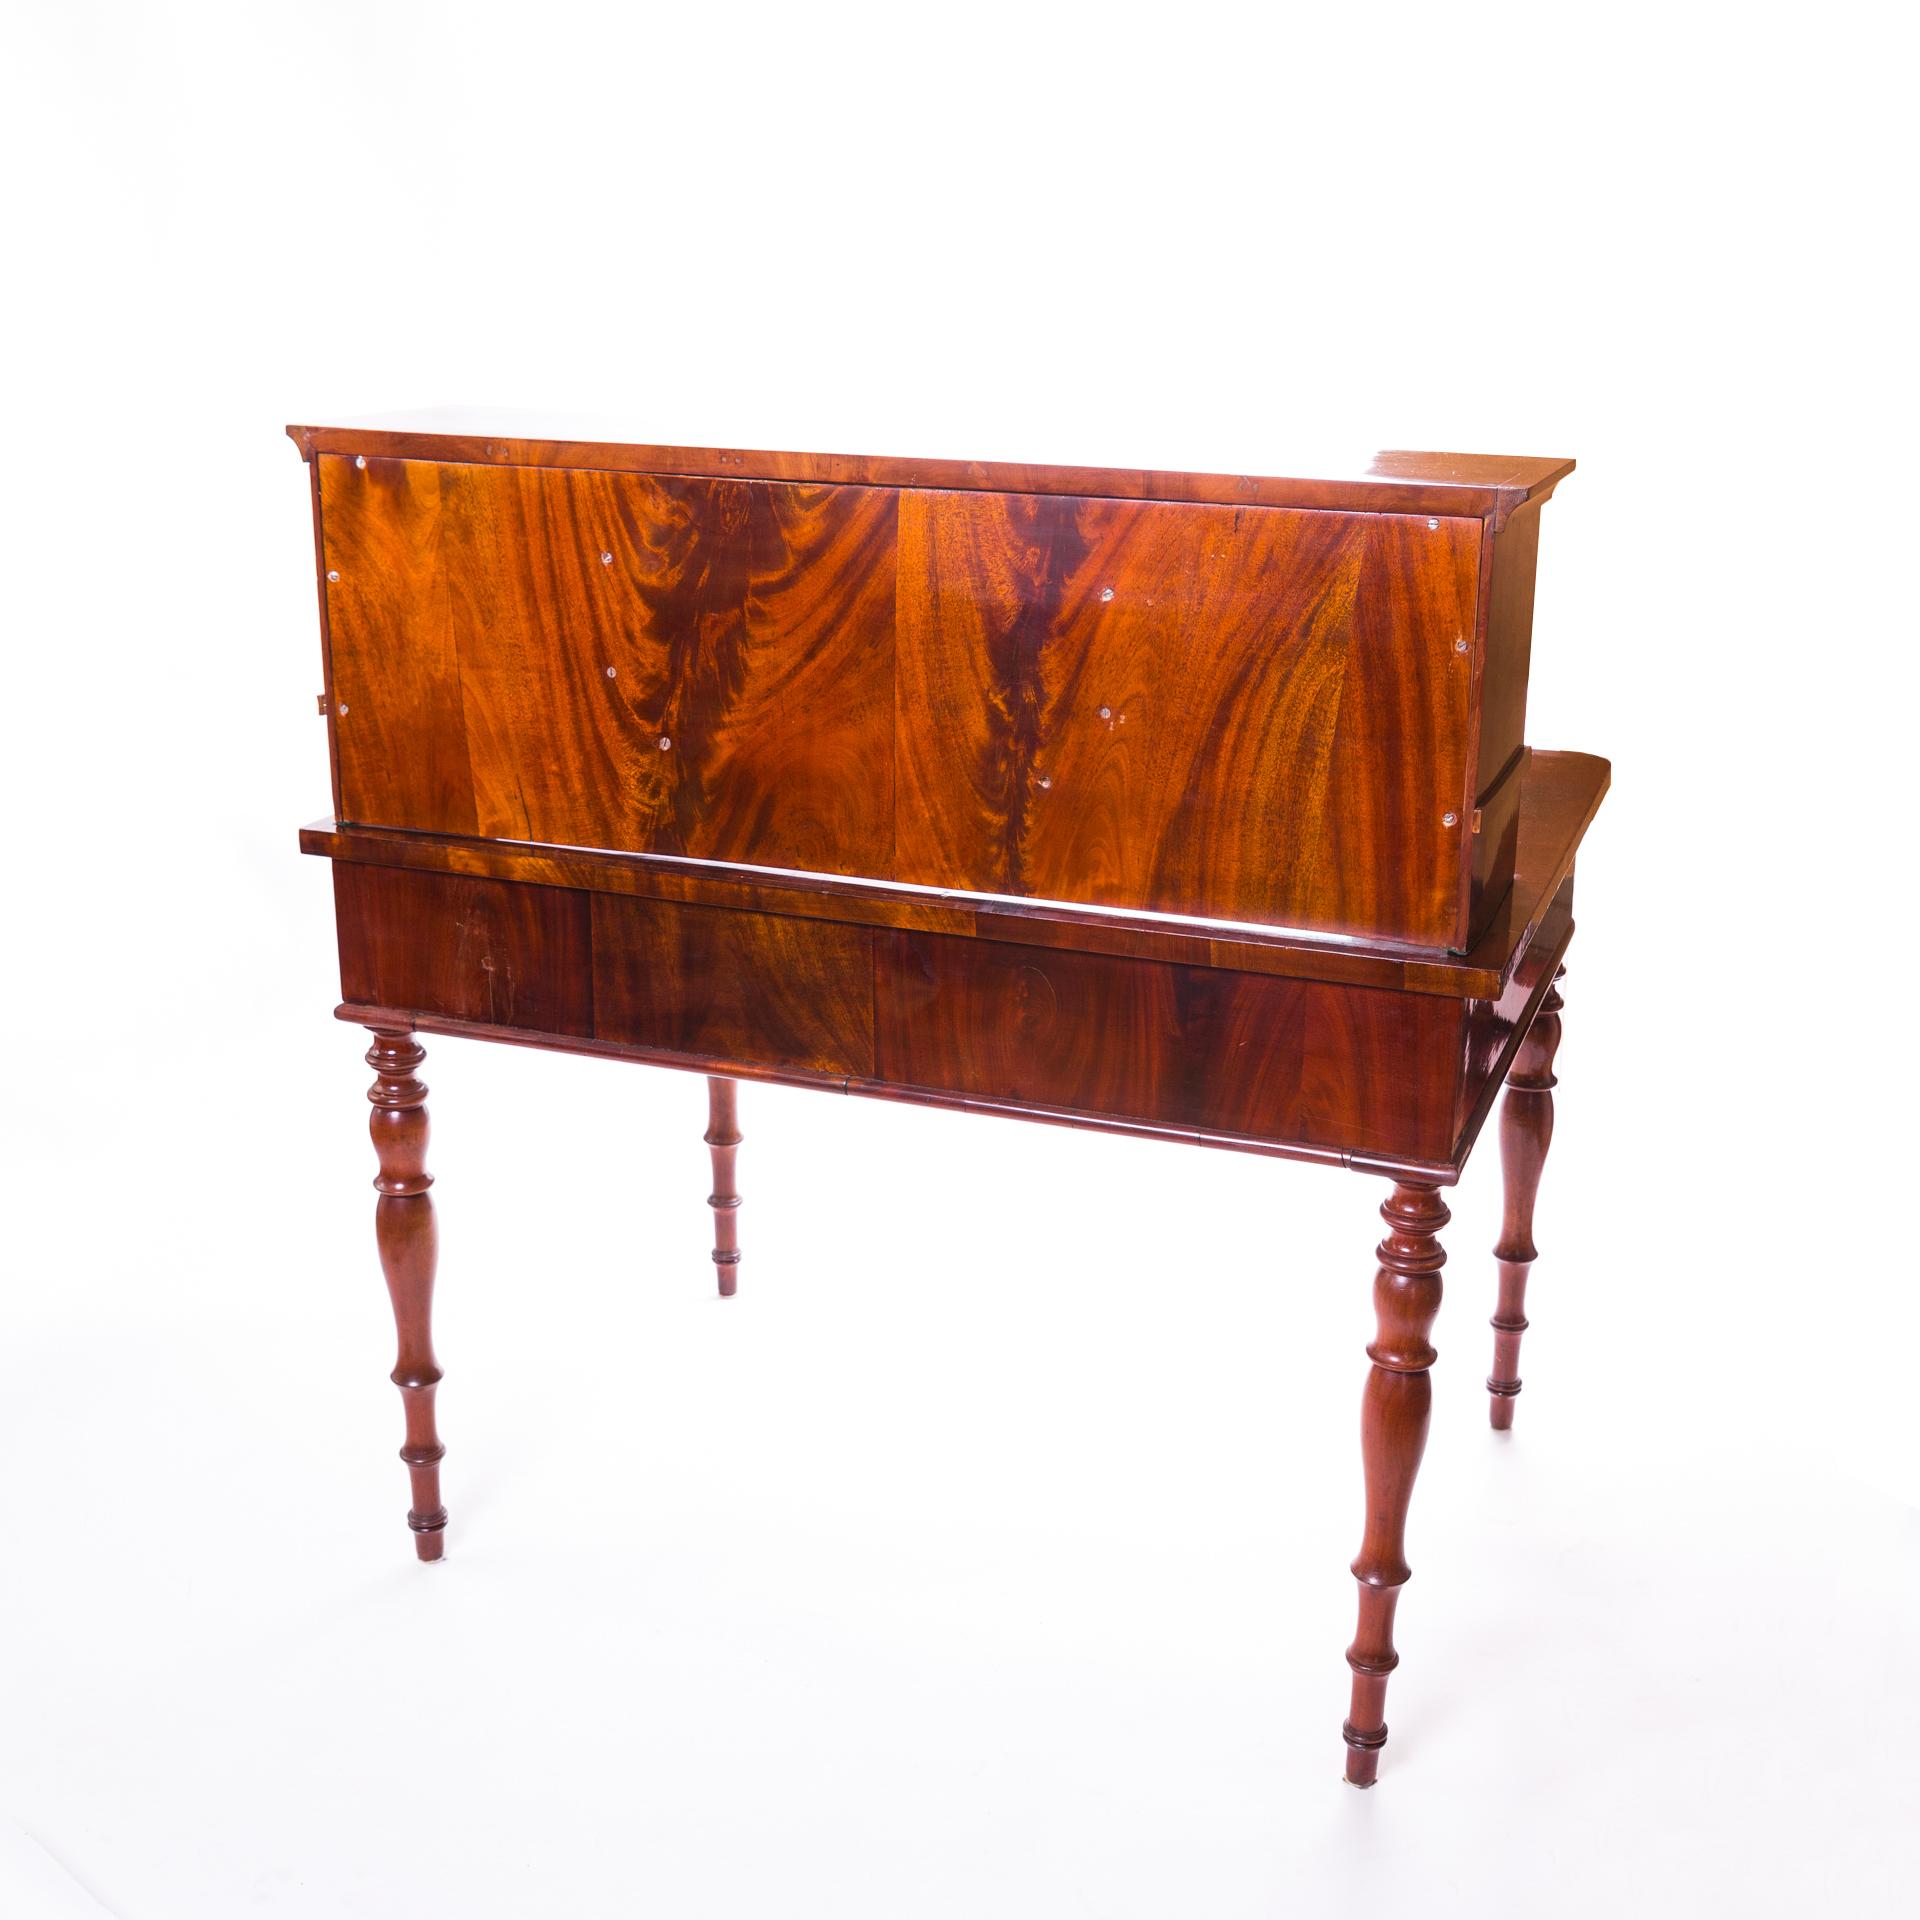 Biedermeier Desk with Extension, Polished Mahogany, Dark, Wooden, circa 1840 For Sale 3